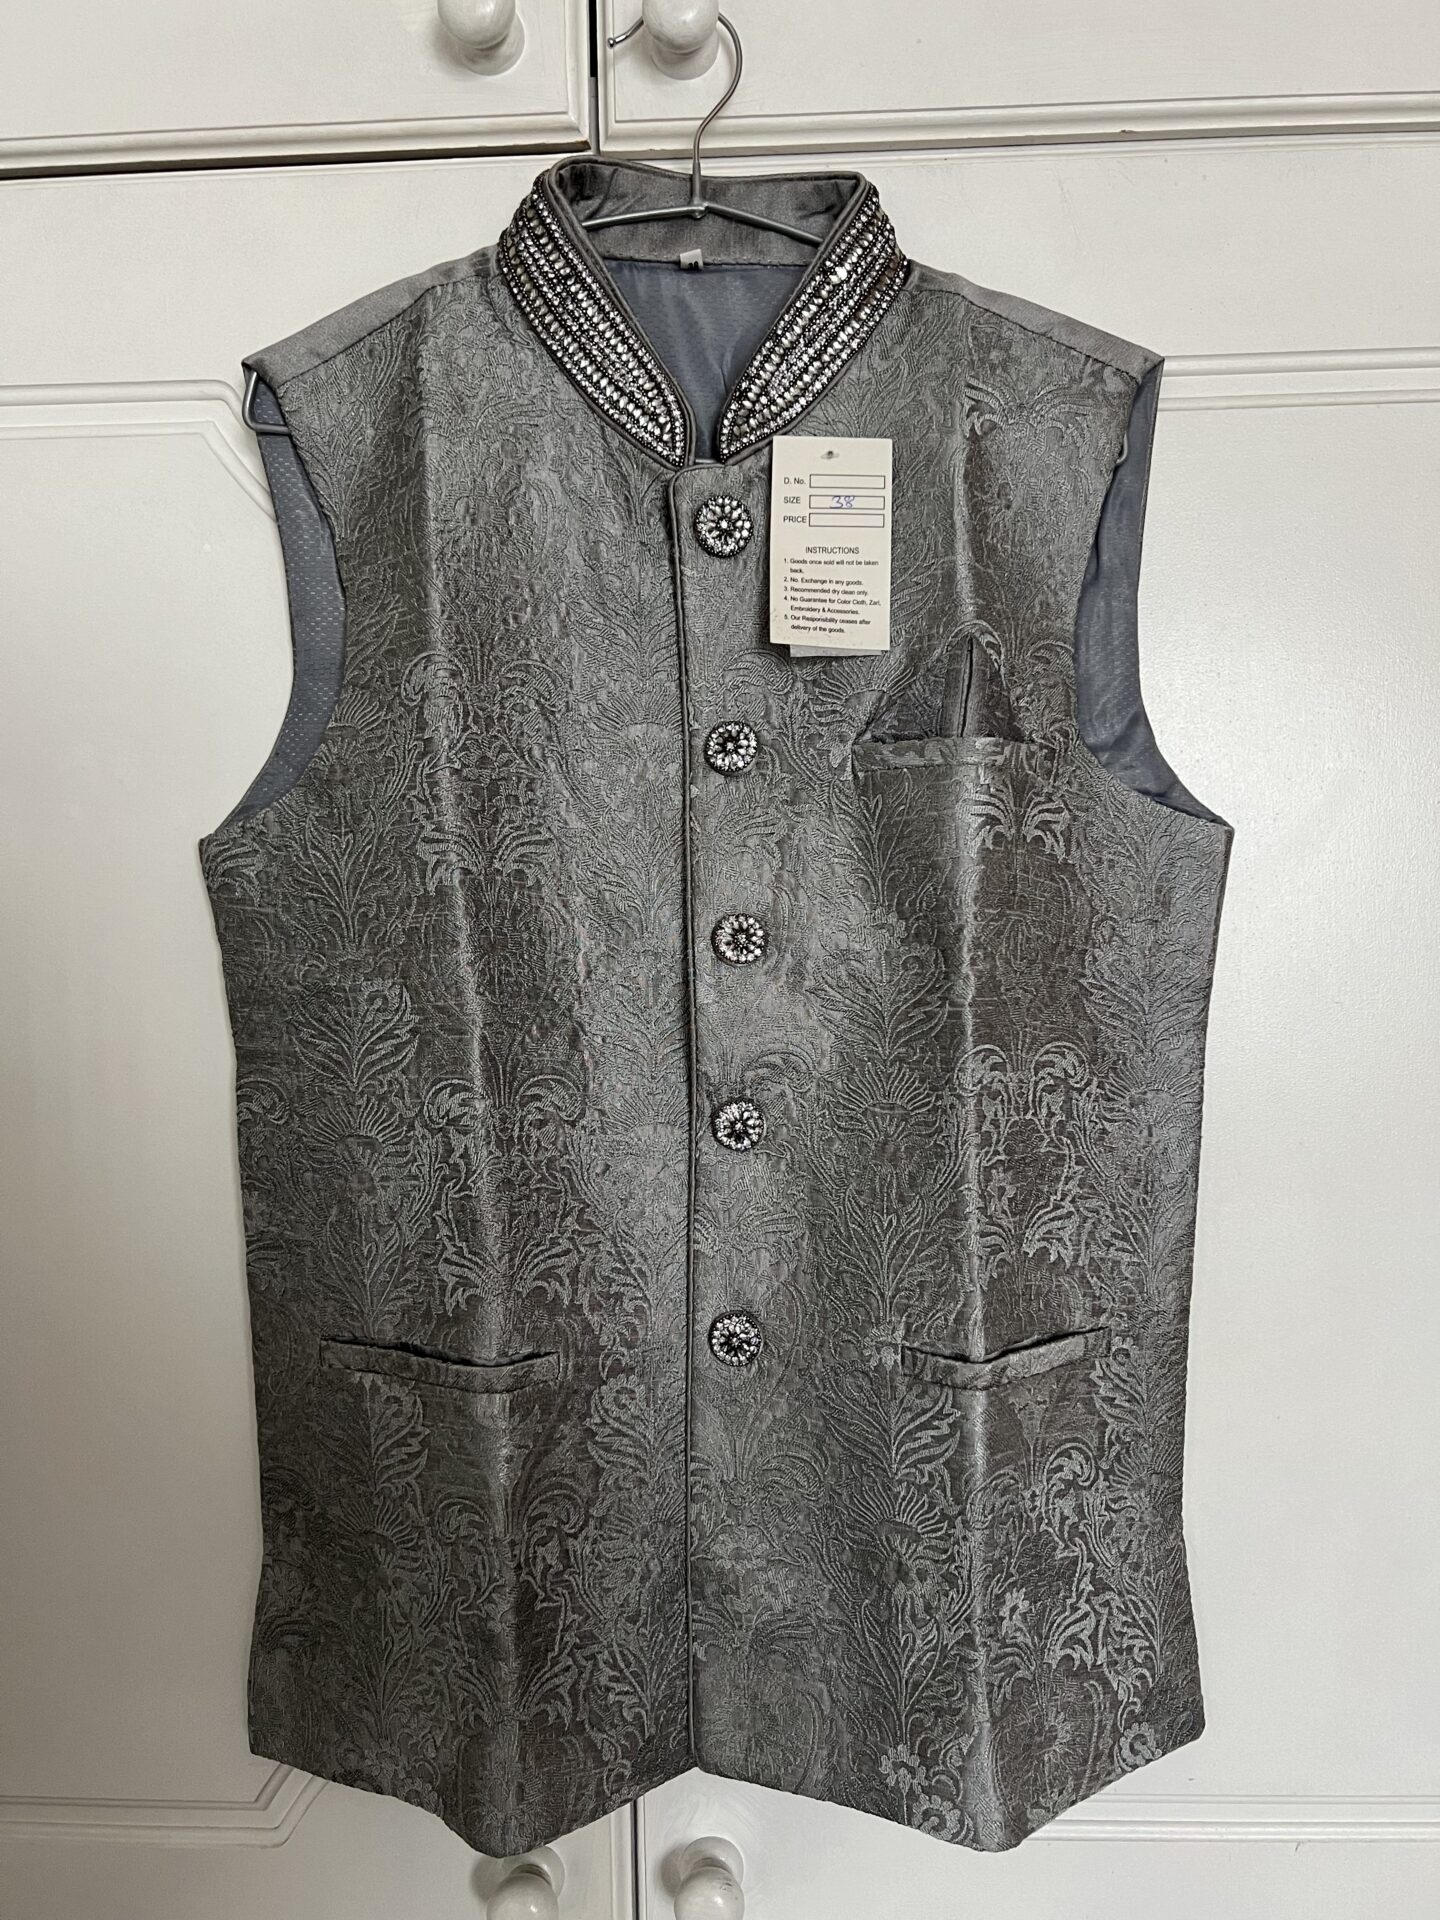 Men’s Grey Waistcoat Jacket – BRAND NEW WITH TAGS – SIZE 36, 38 & 40